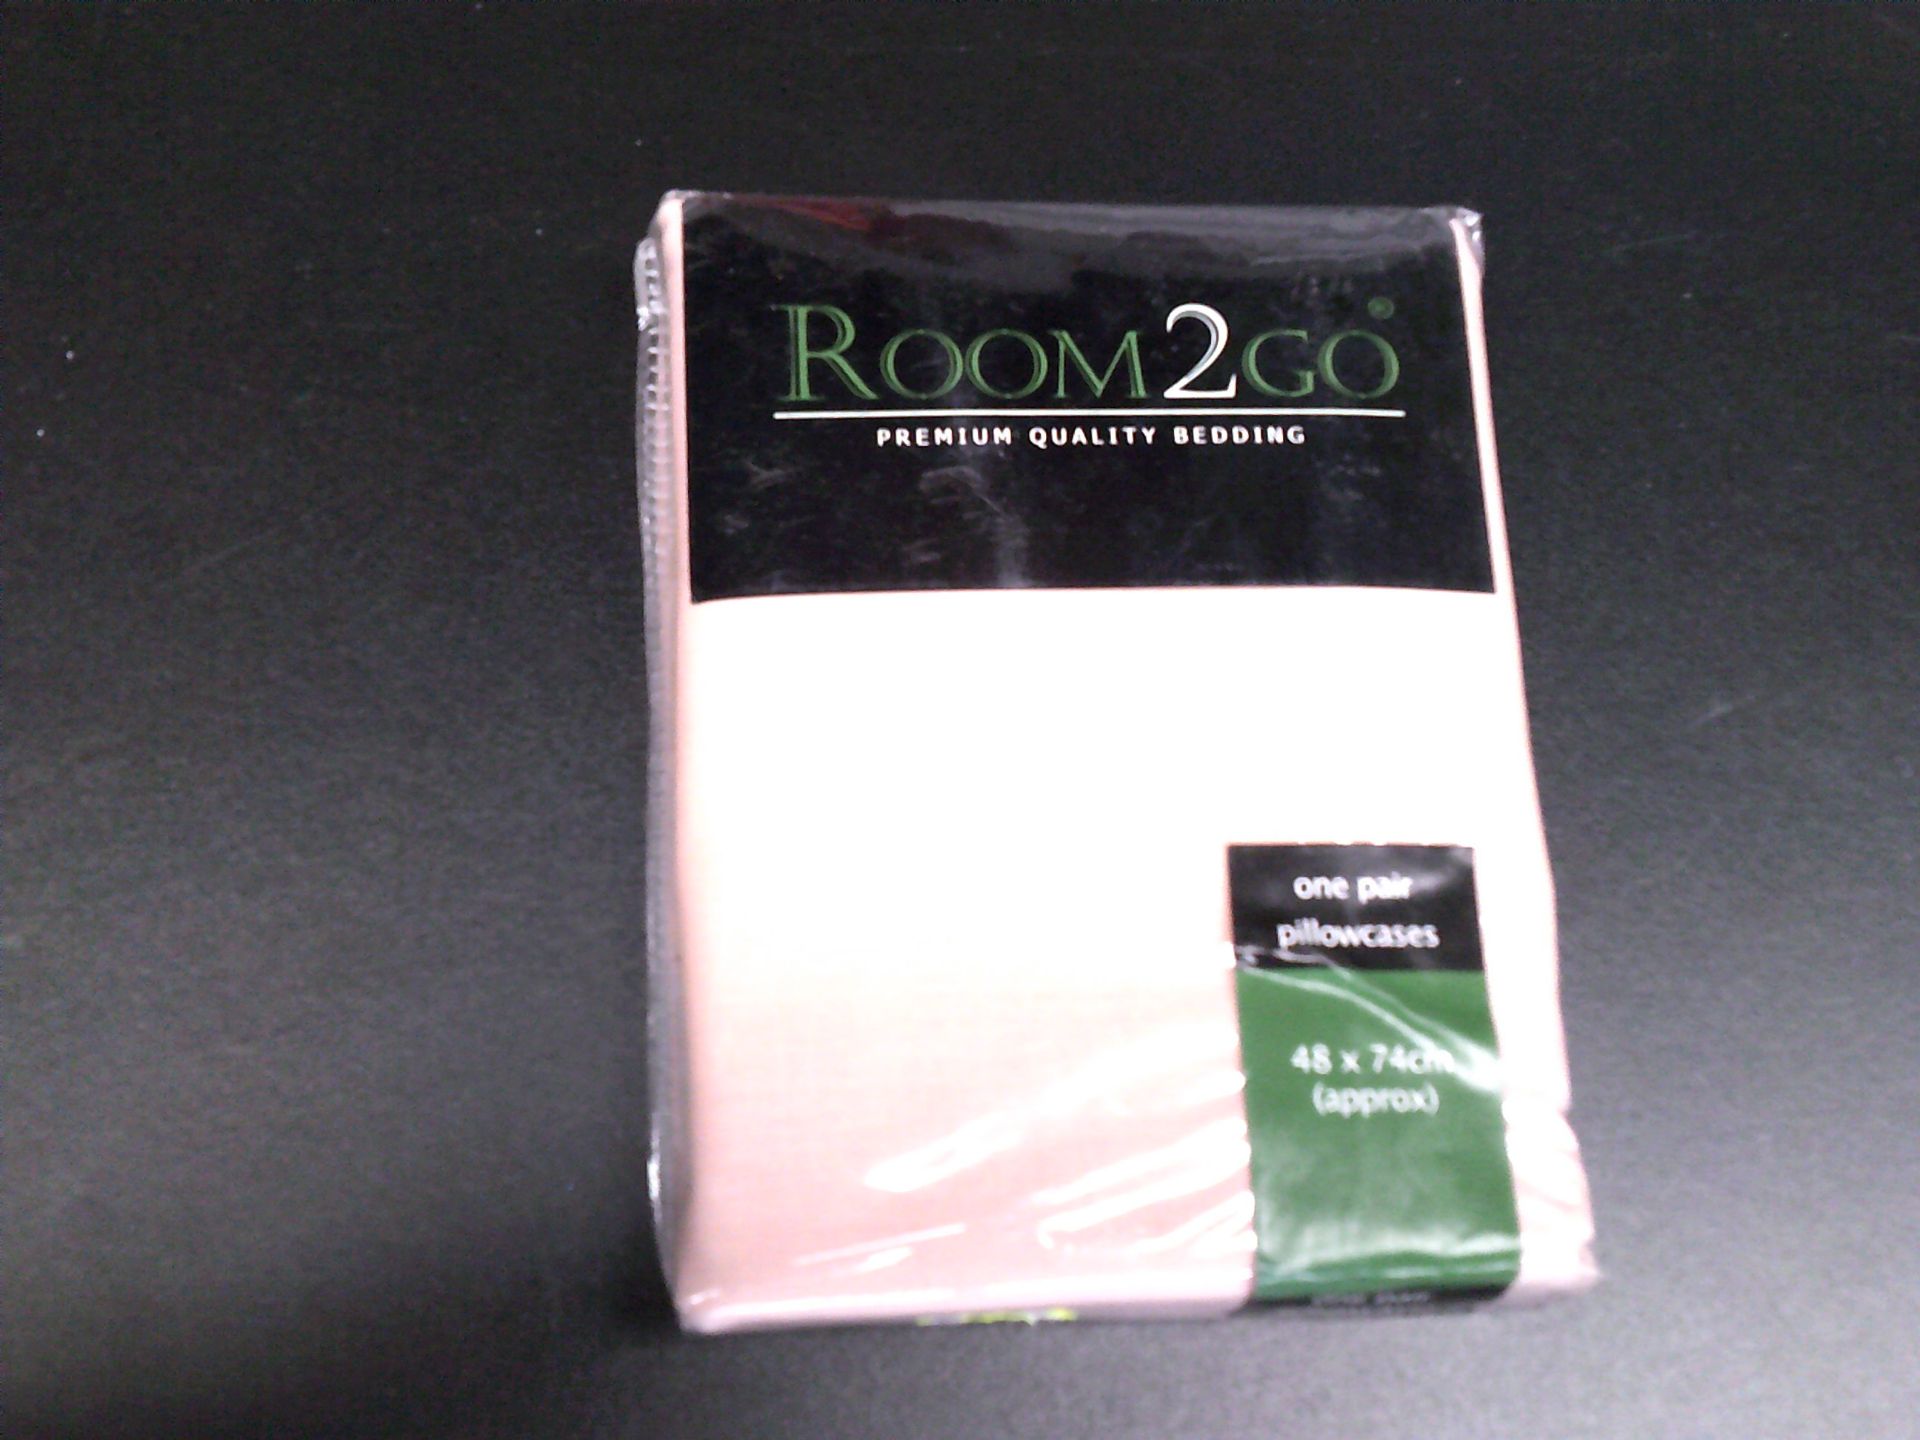 Room2go one pair pillowcases 48x74cm (Delivery Band A)